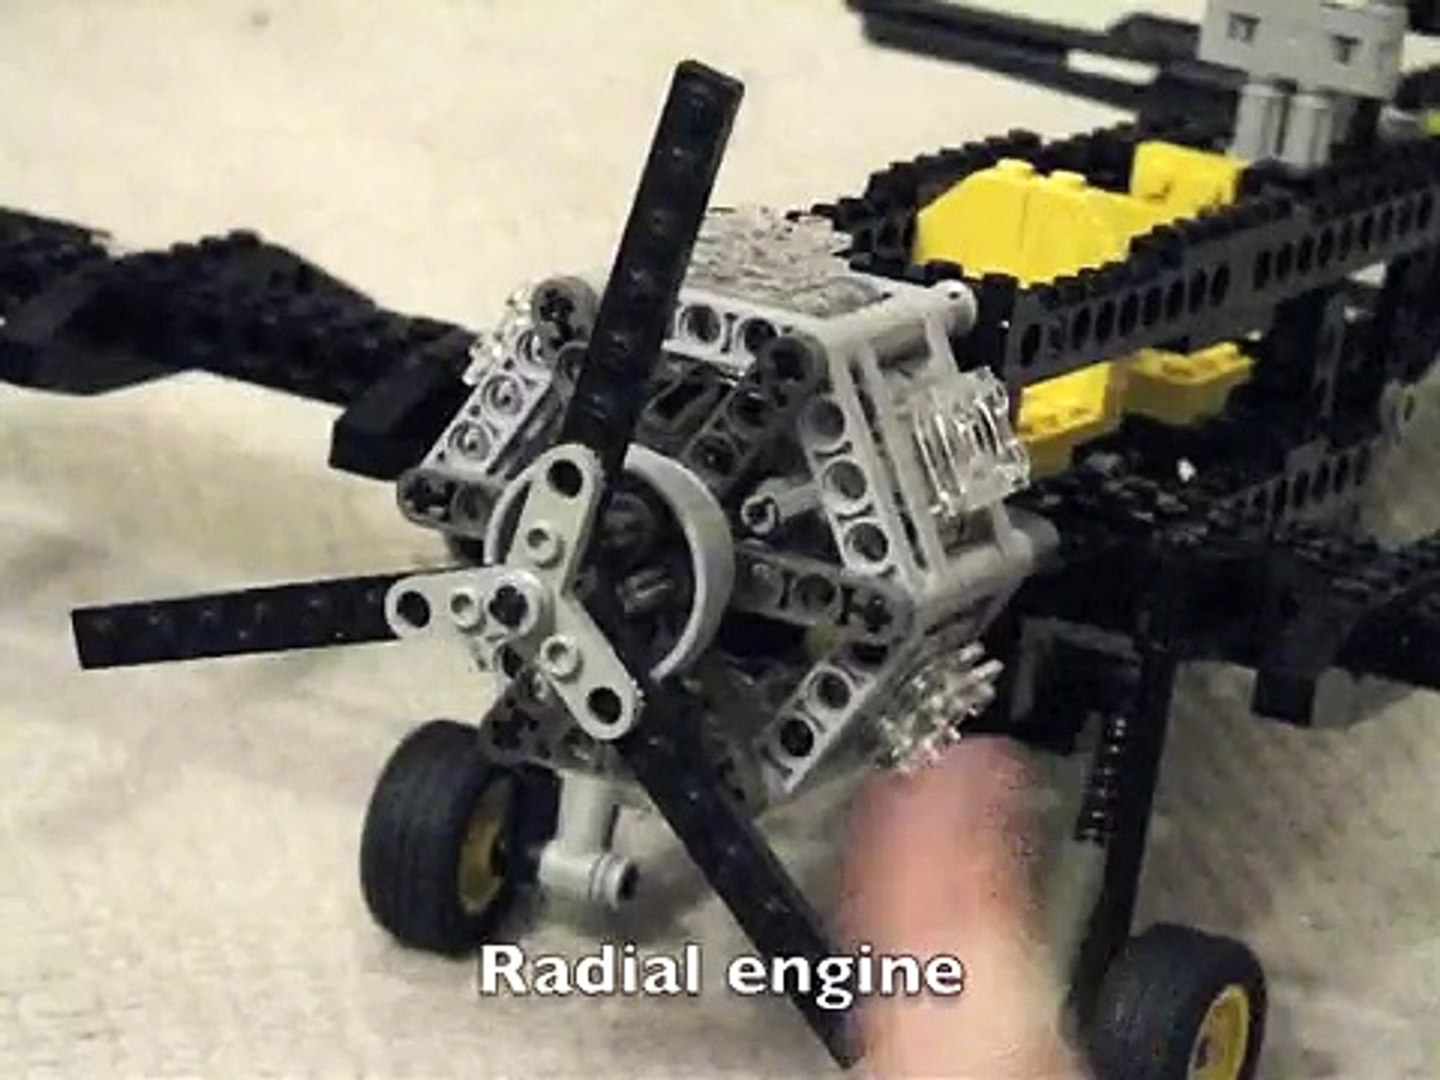 Lego Technic plane with radial engine (updated) - video Dailymotion